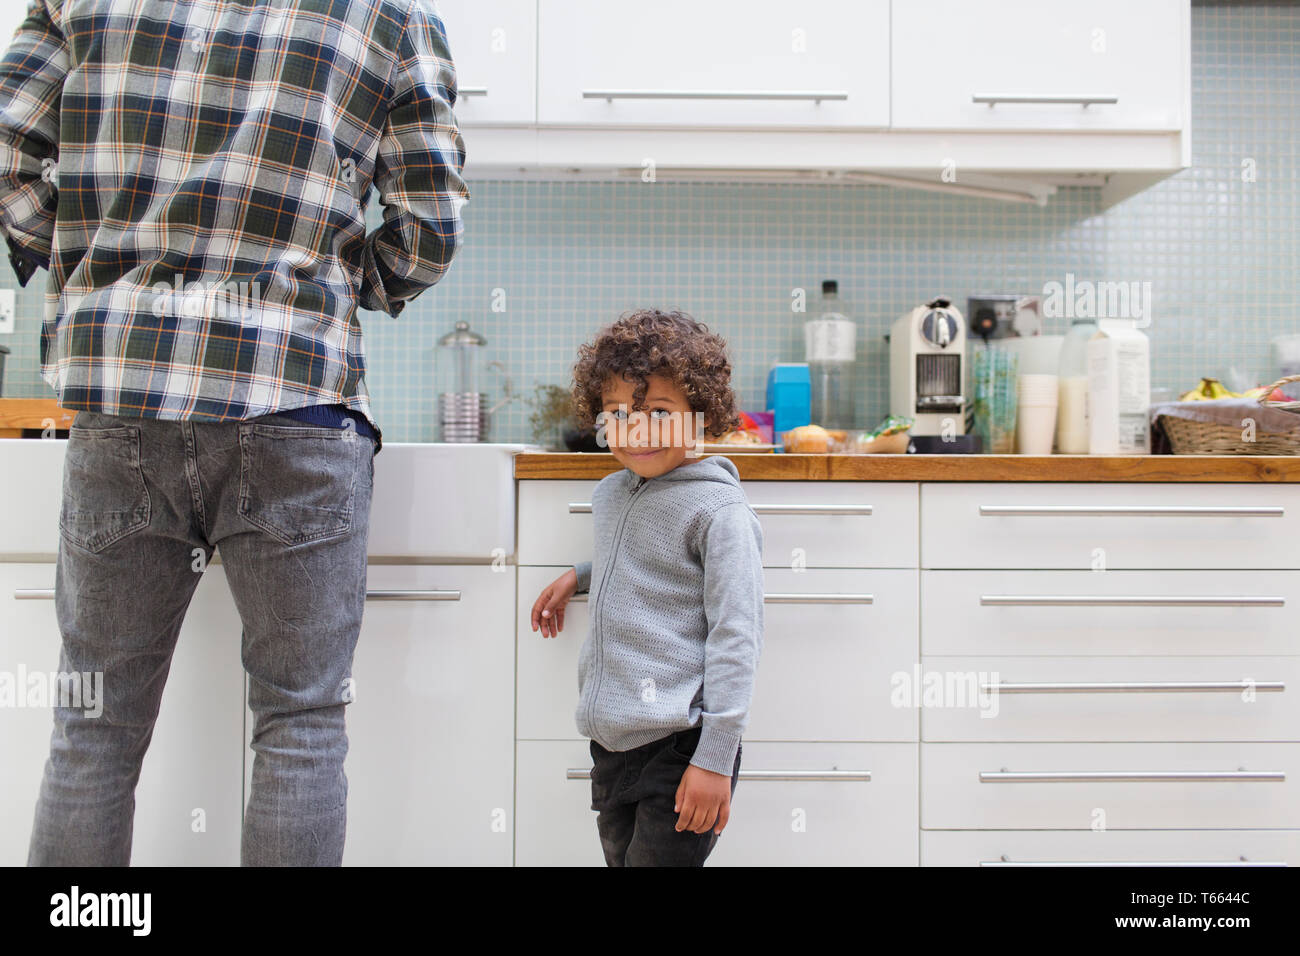 Portrait cute boy in kitchen with father Stock Photo